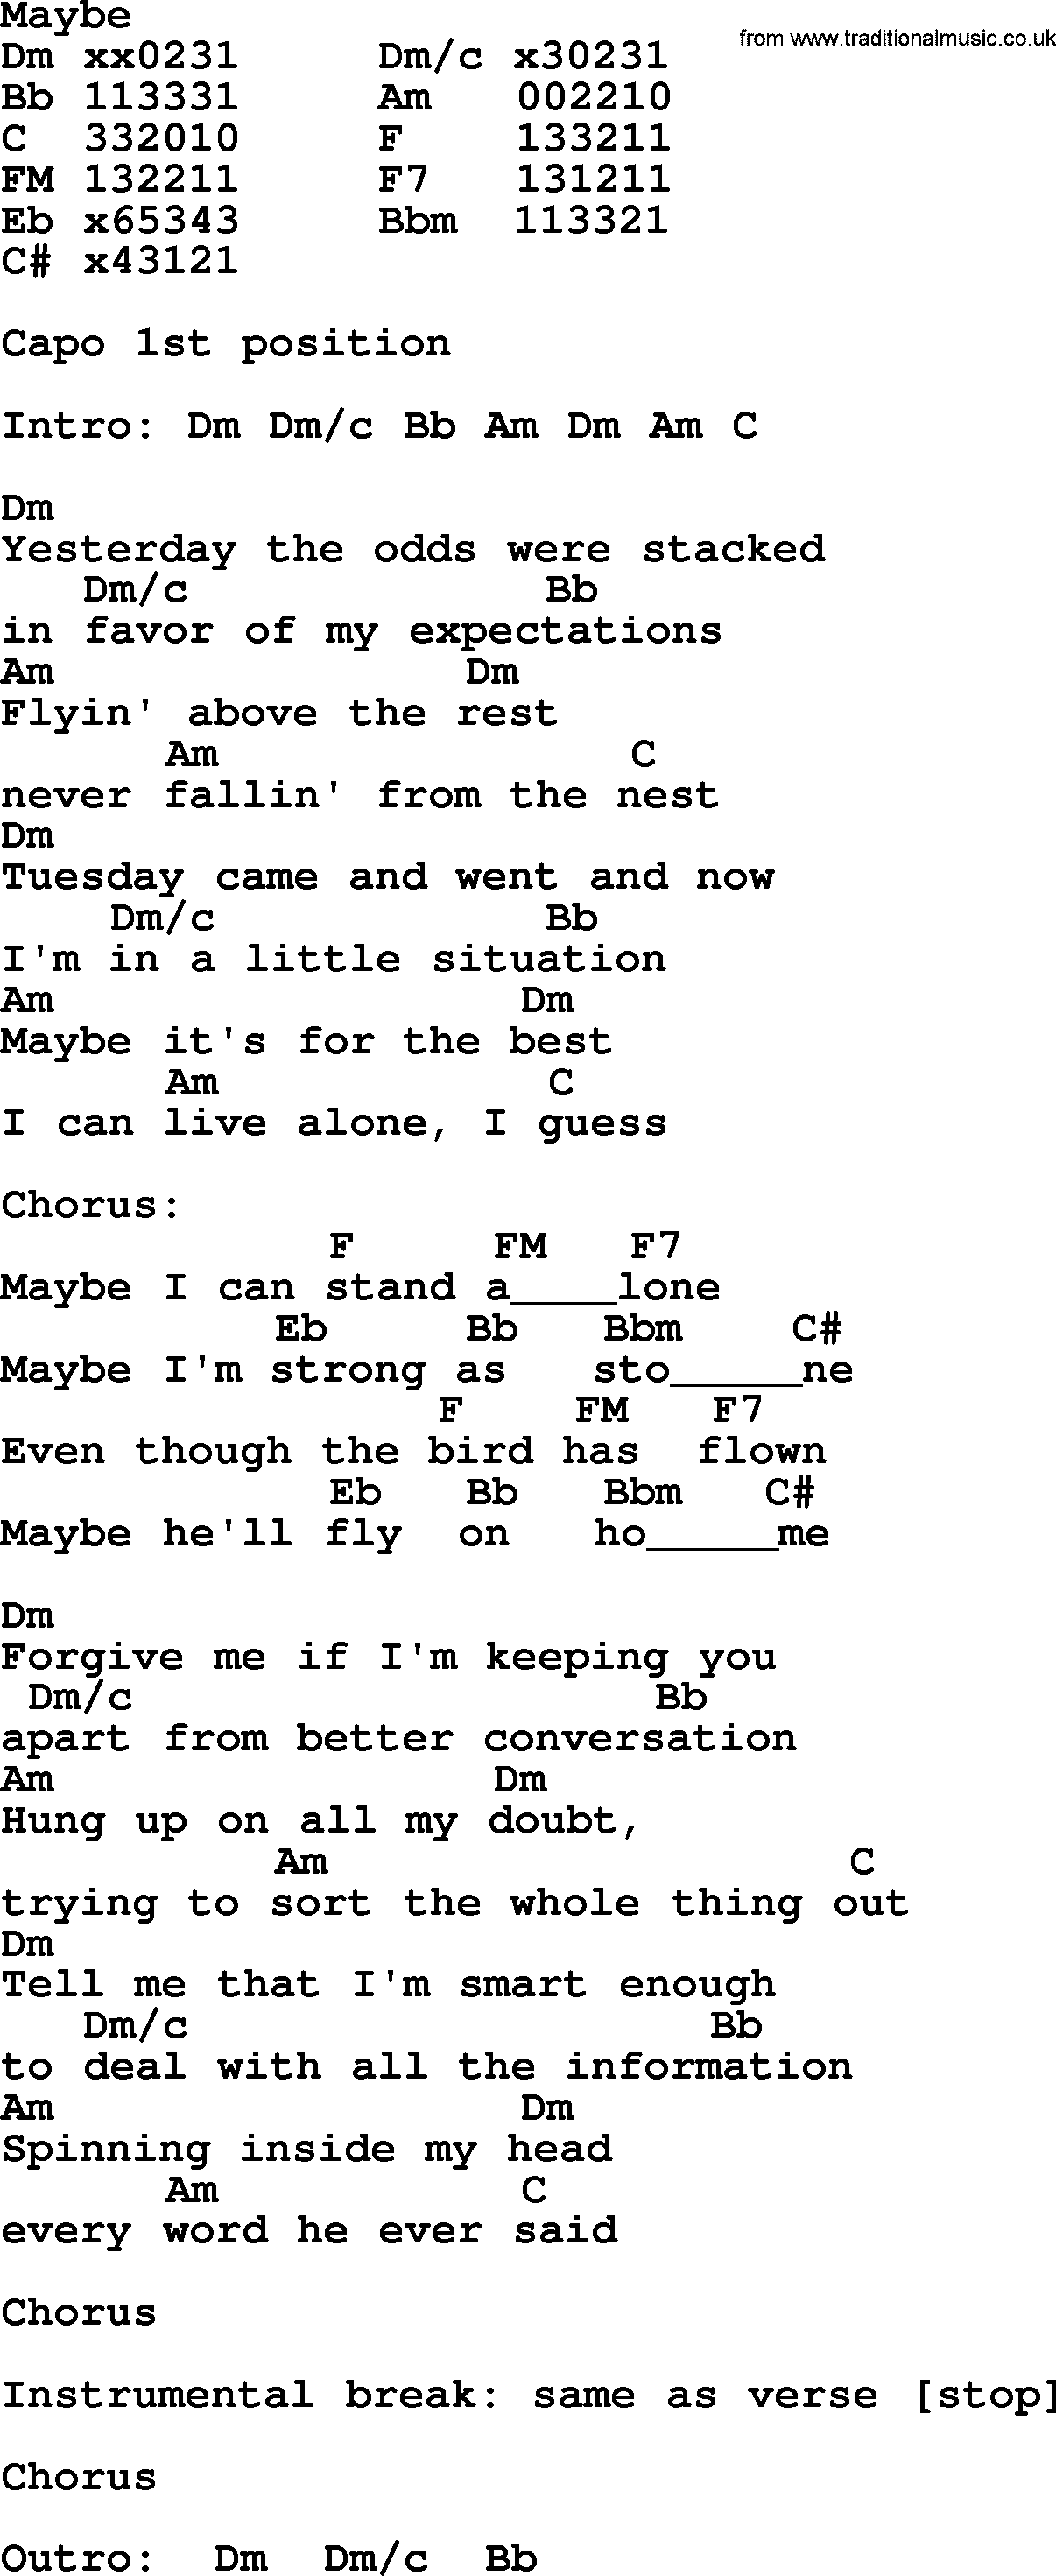 Bluegrass song: Maybe, lyrics and chords